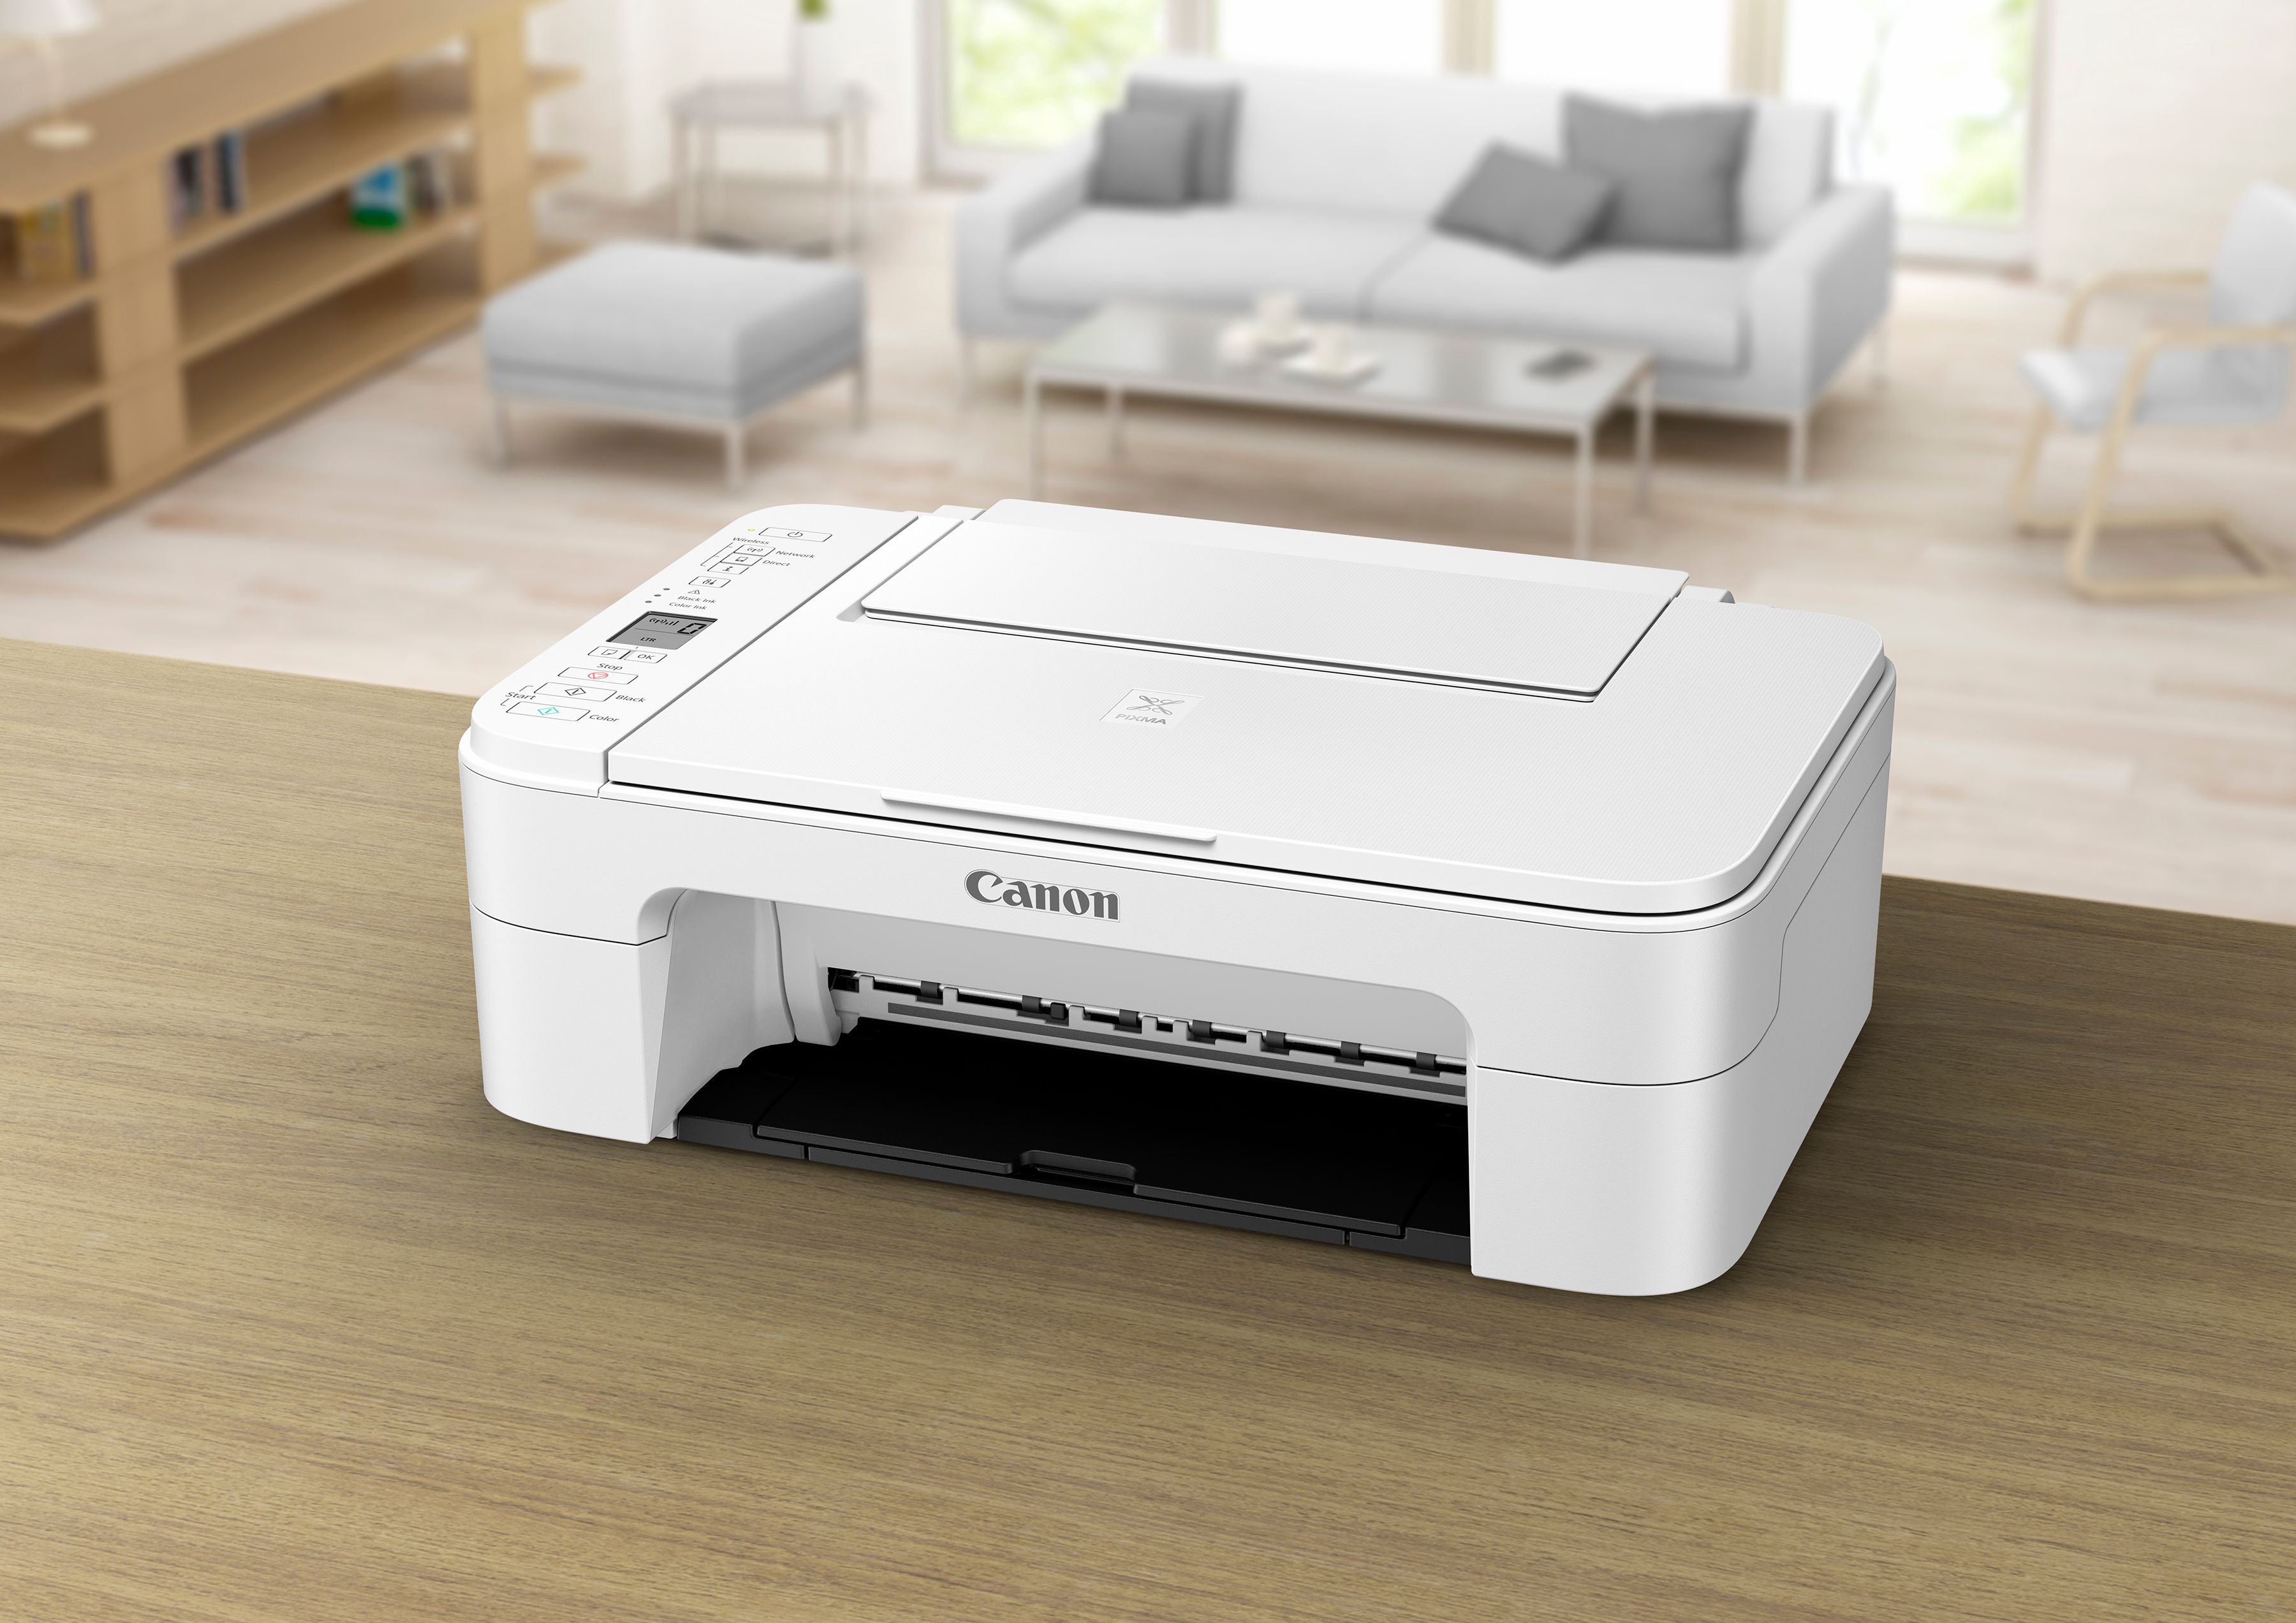 Canon TS3122 US Wh/Blk Pixma Wireless Inkjet All-In-One Printer - image 4 of 5